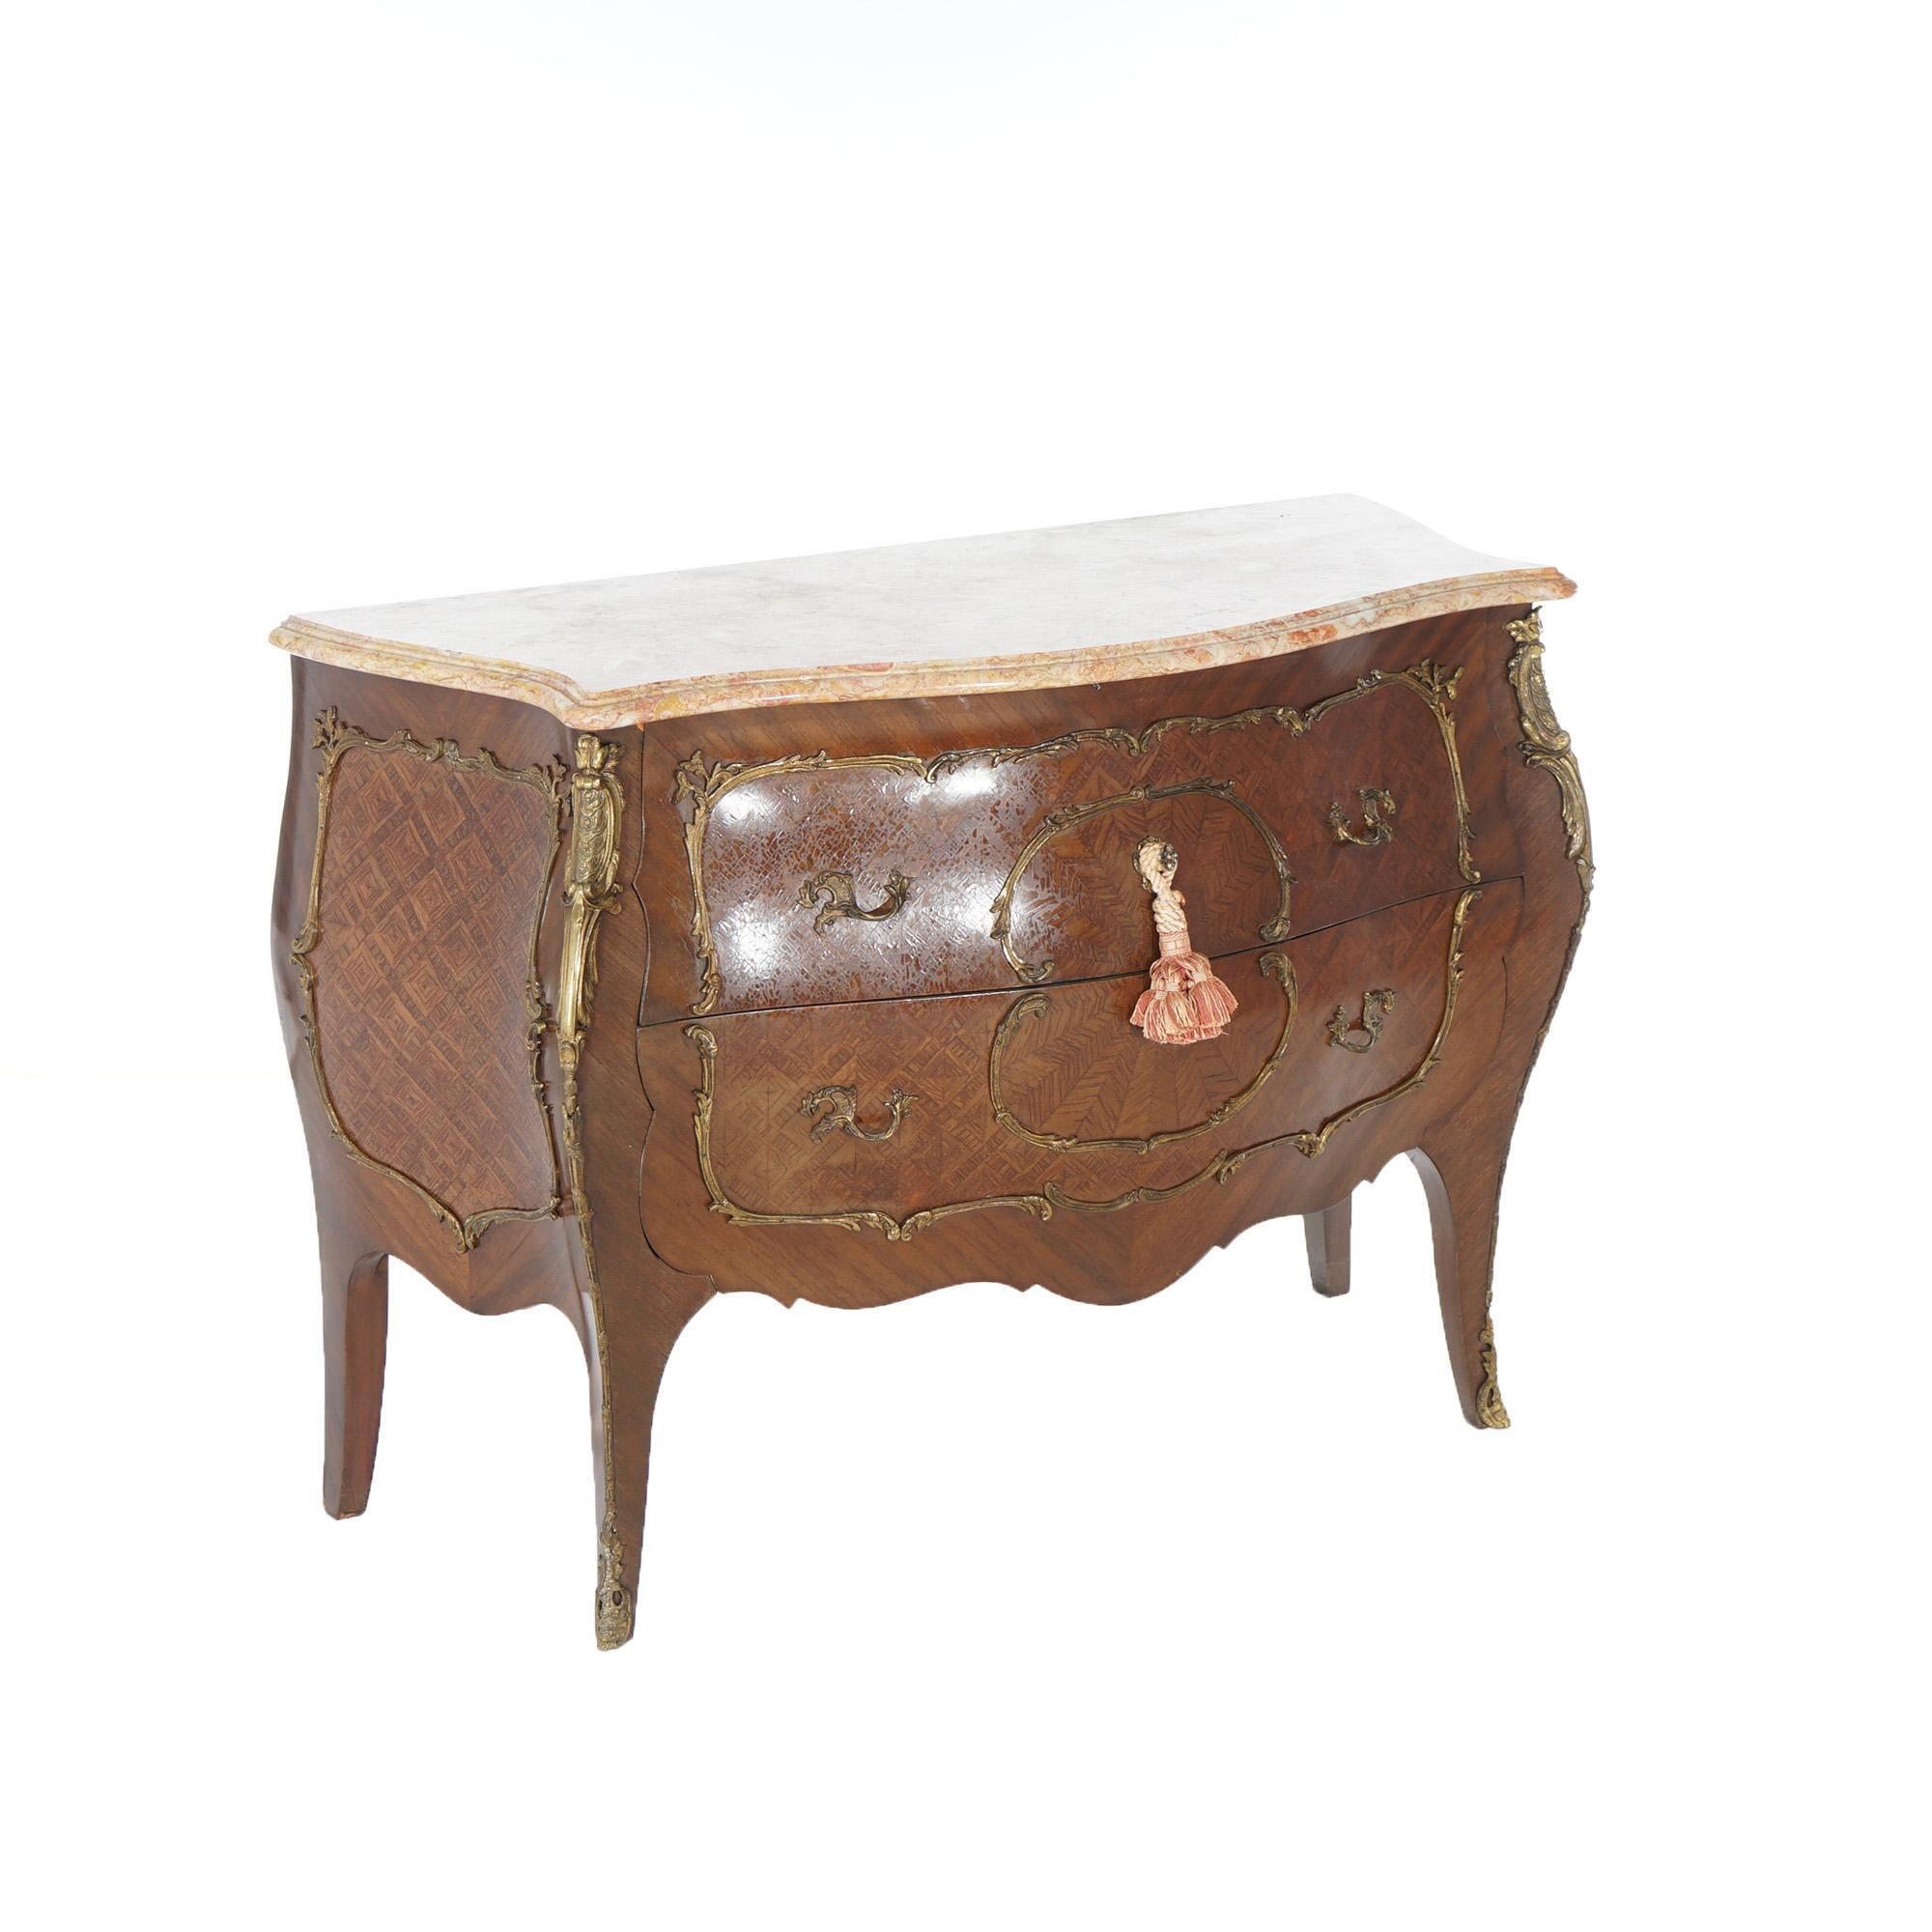 20th Century Antique Louis XIV Style Kingwood & Satinwood Parquetry Marble Top Commode c1920 For Sale